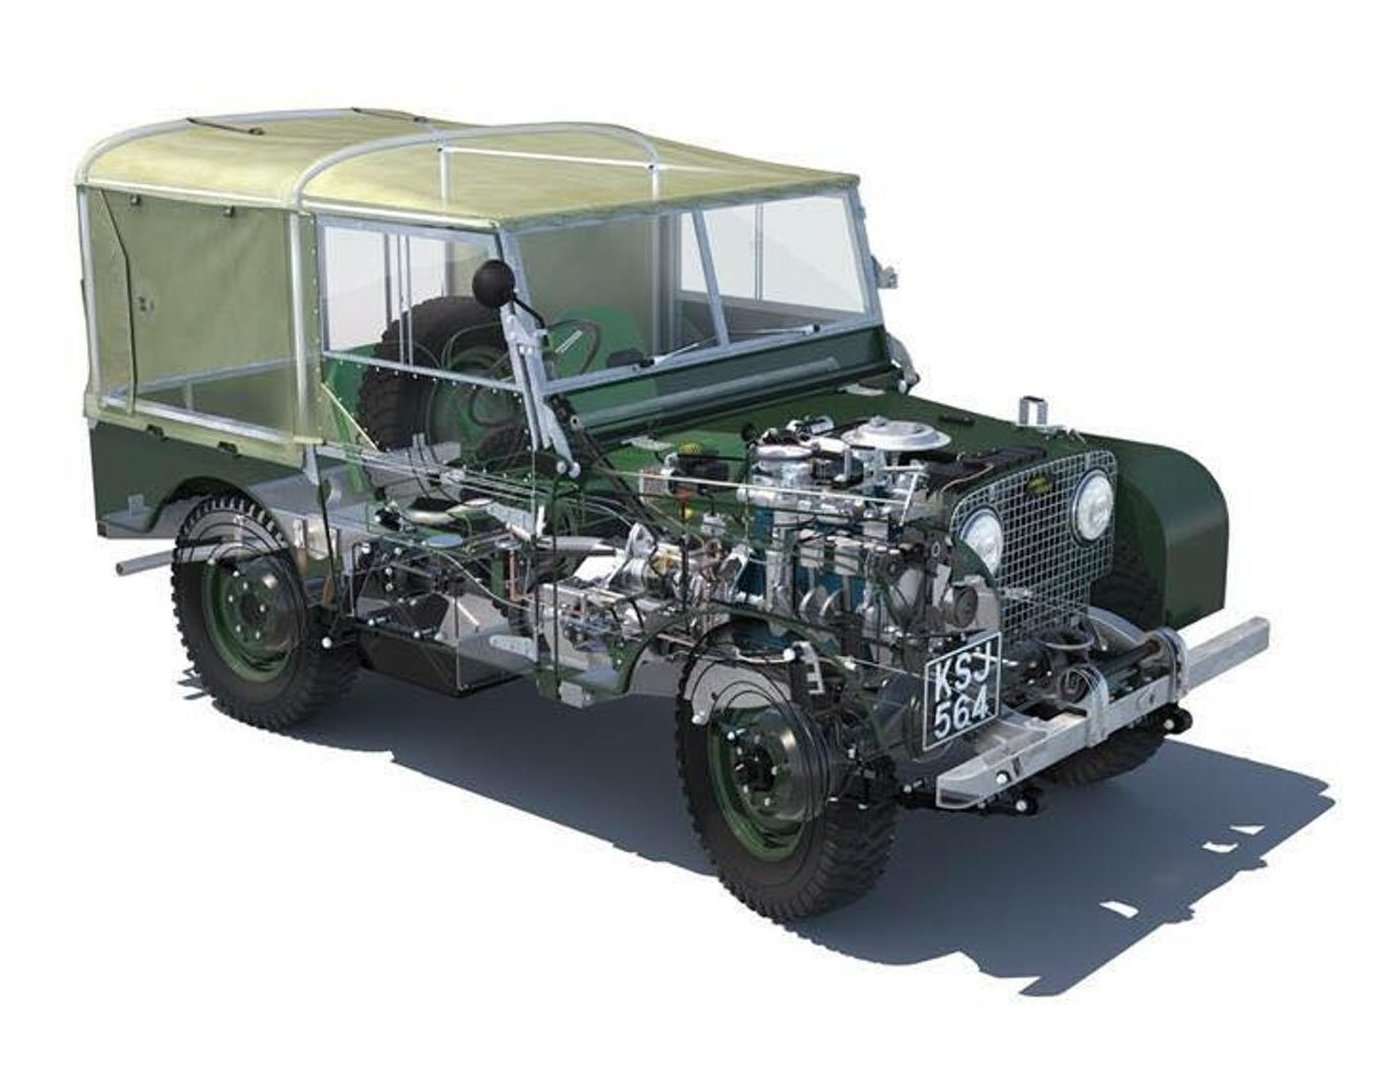 A Brief History Of The Land Rover Series I